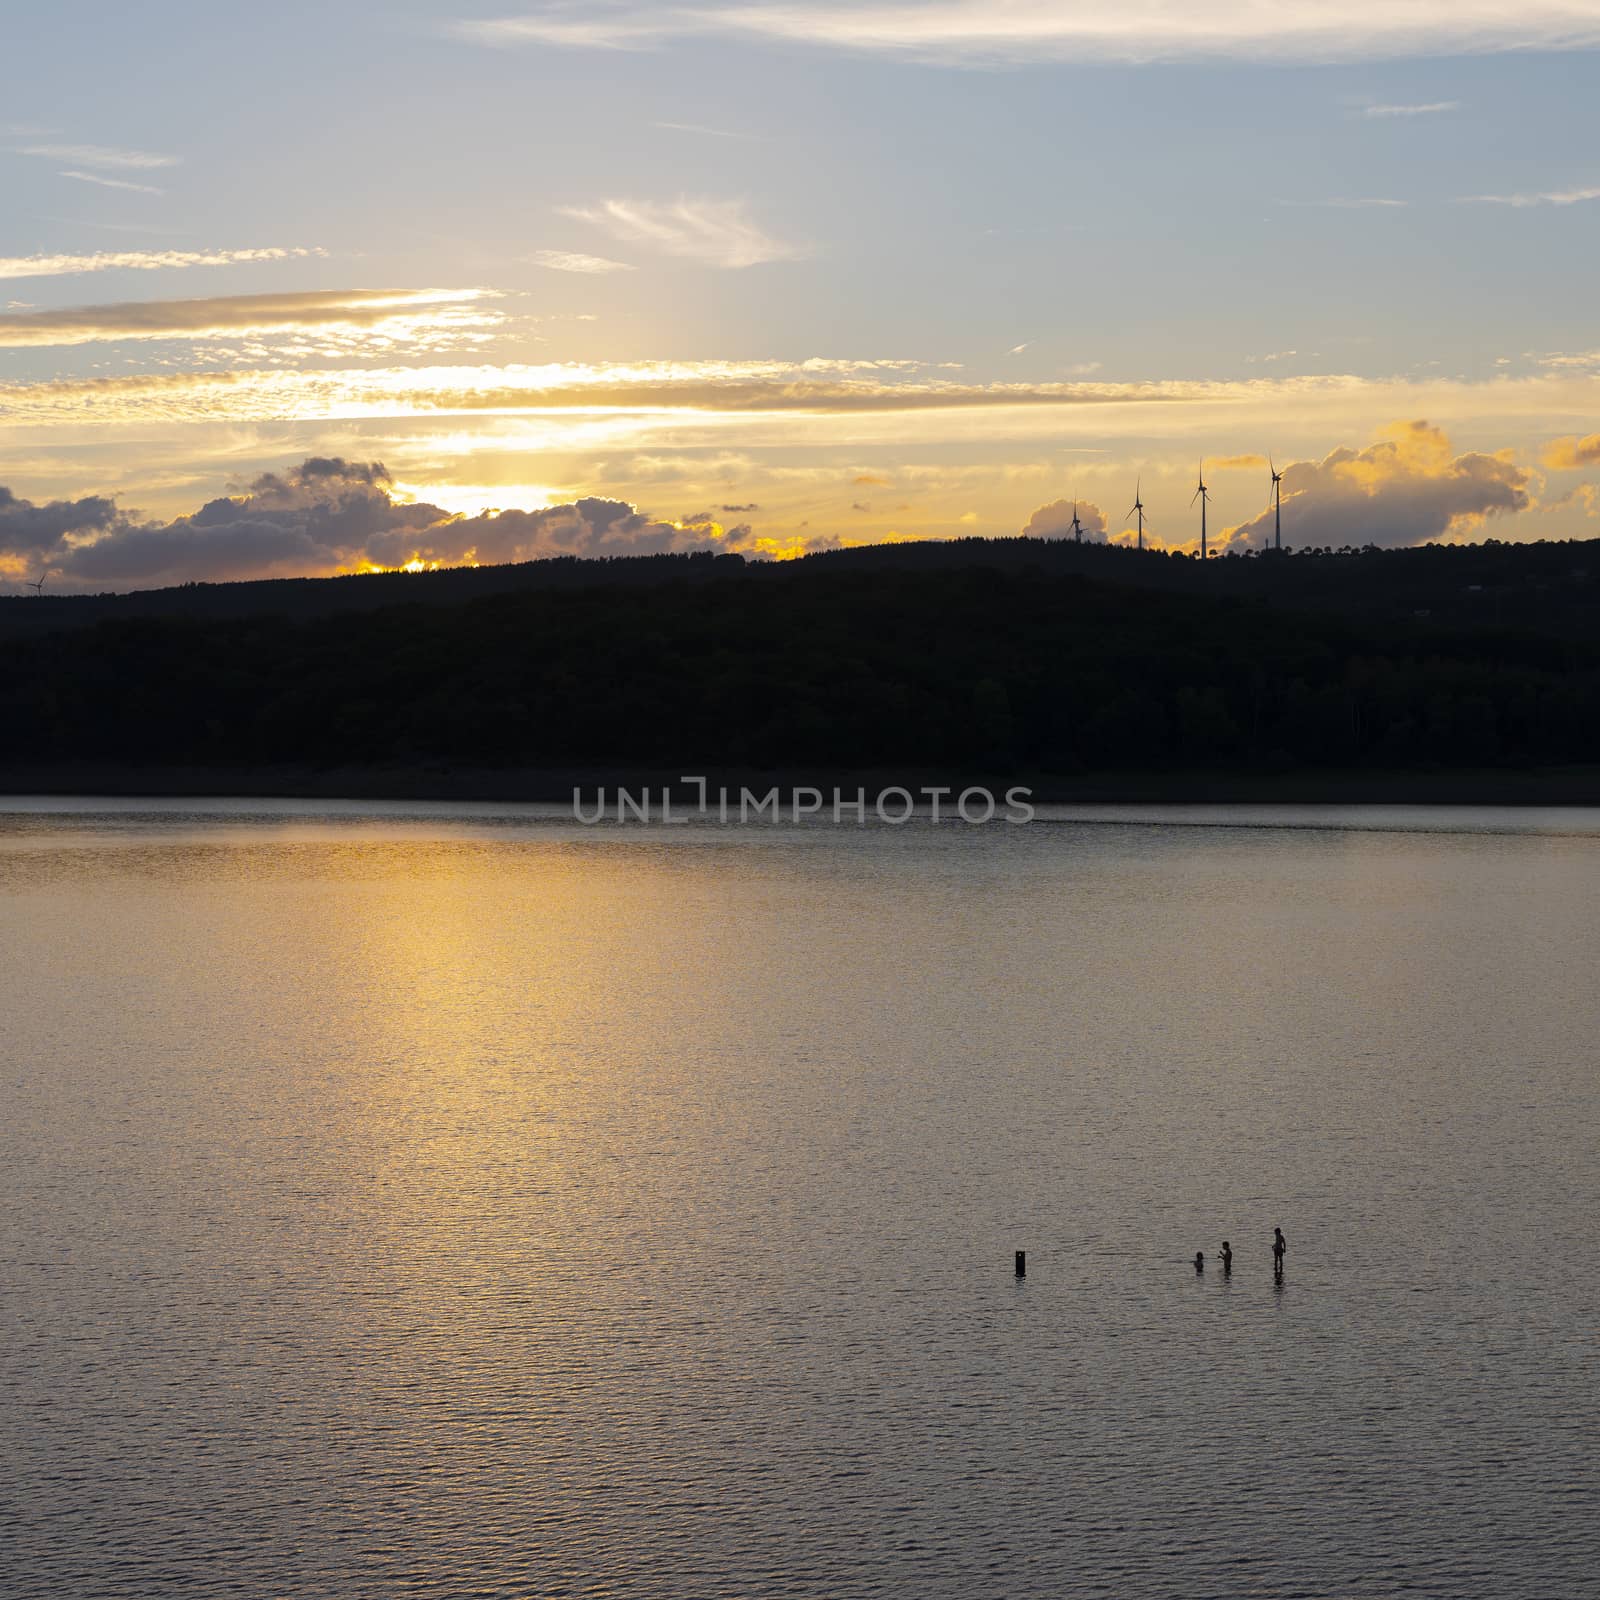 three people swim in calm lake rursee at sunset in German national park eifel with wind turbines in the background